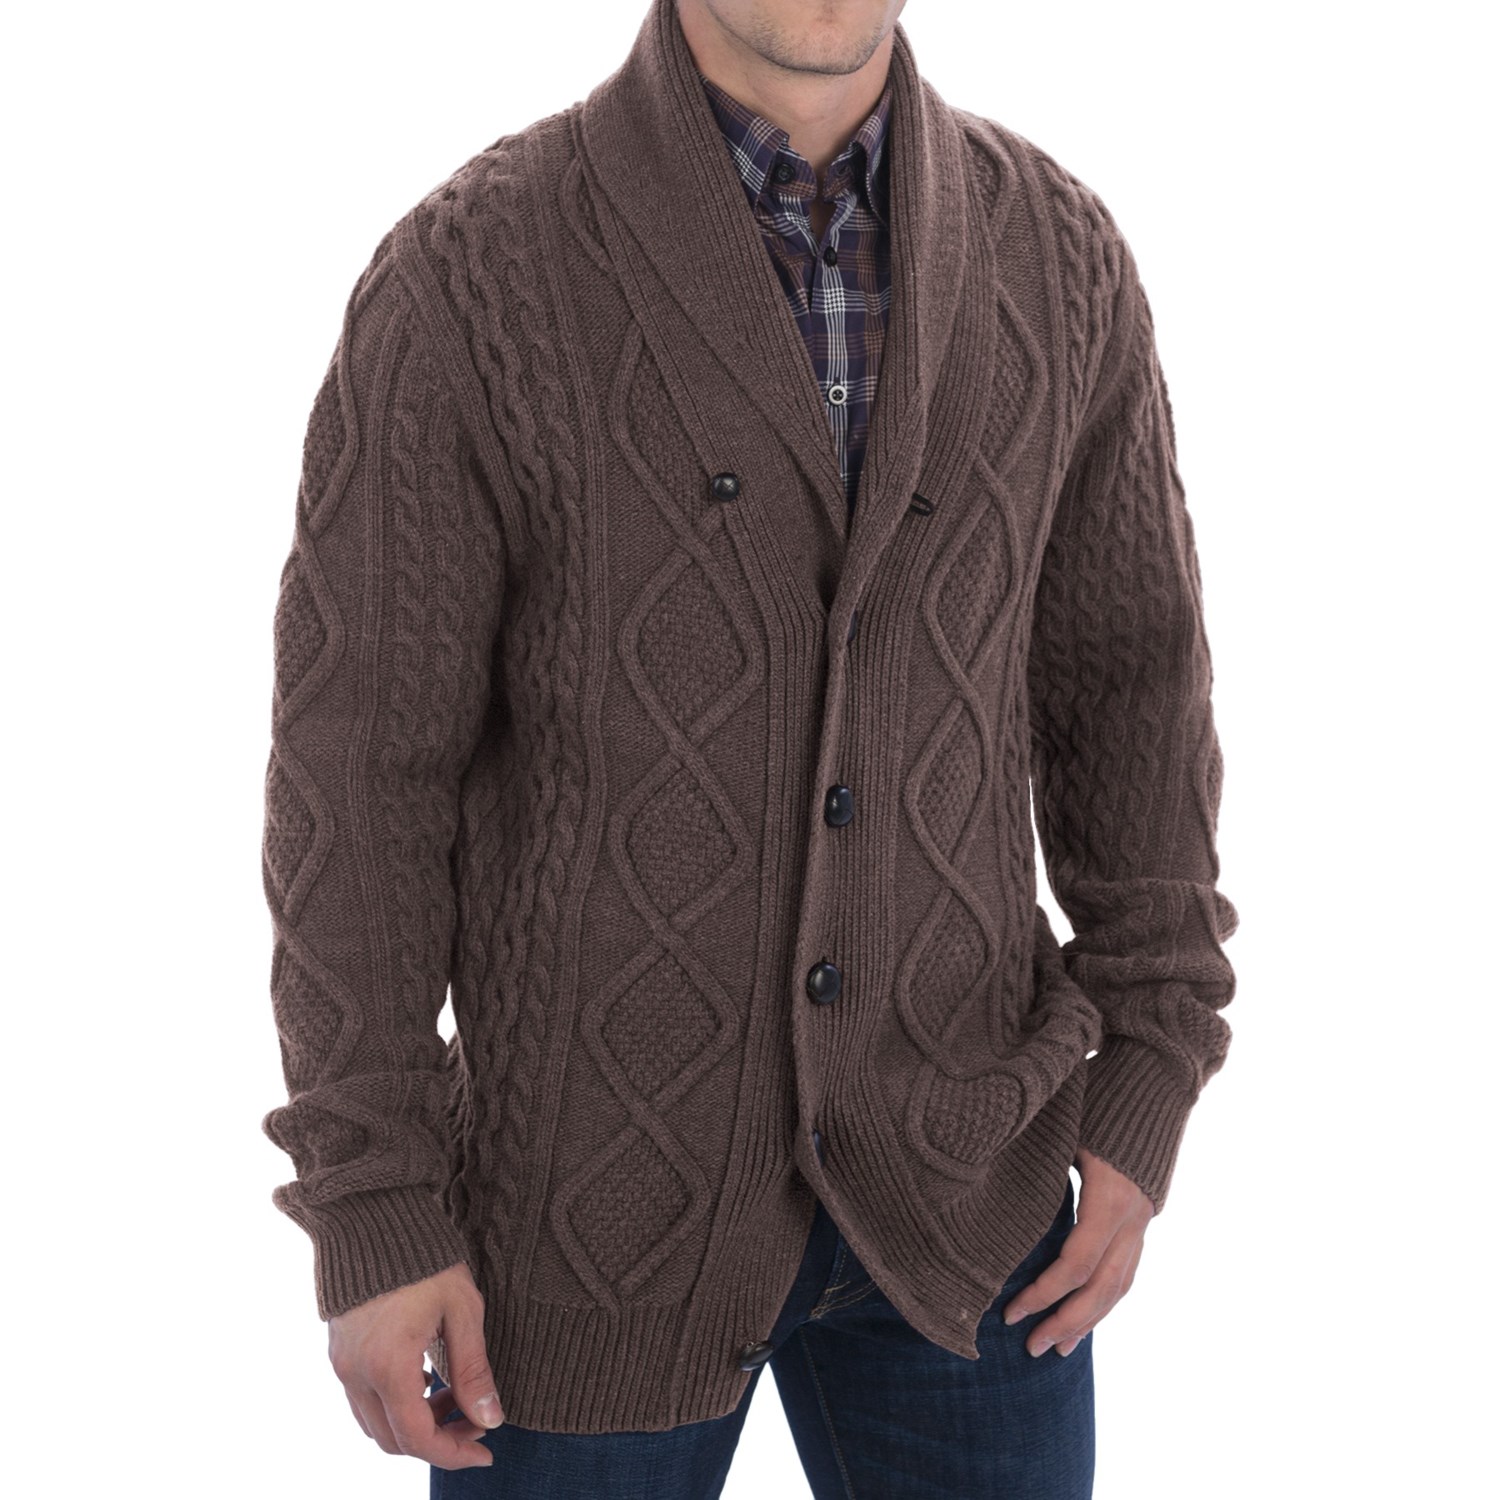 Barbour Kirktown Shawl Cardigan Sweater (For Men) 8779A - Save 56%